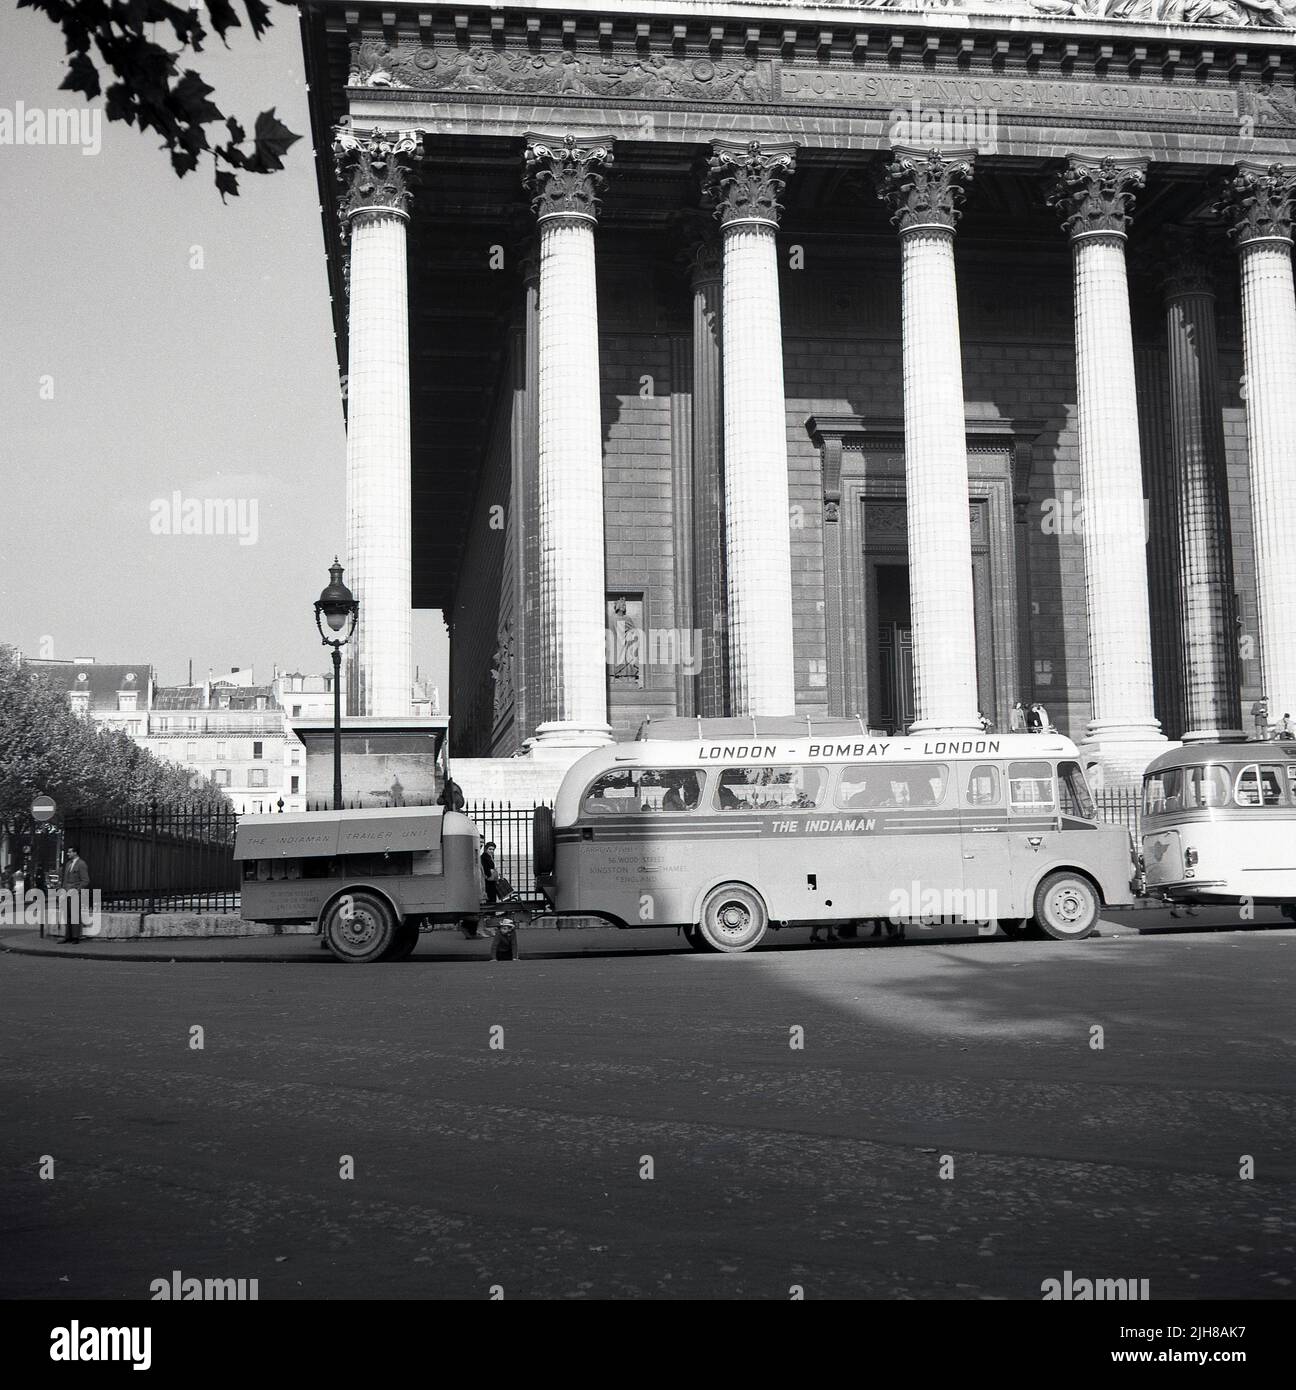 1960, summertime and the trans-continental bus 'The Indiaman', parked outside the Assemblee Nationale, Paris, France. Passengers went from London to Bombay in India and back to London, organised by Garrow-Fisher Tours of Kingston Upon Thames, England, UK. At the rear of the vehicle, a refurbished 1948 AEC Regal III, for 24 passengers, a trailer Unit. The Indiaman was the first bus connecting London and south Asia, starting in 1957 with a service from London to Calcutta. Political unrest in the Middle East eventually made such routes difficult and they ended in 1979. Stock Photo